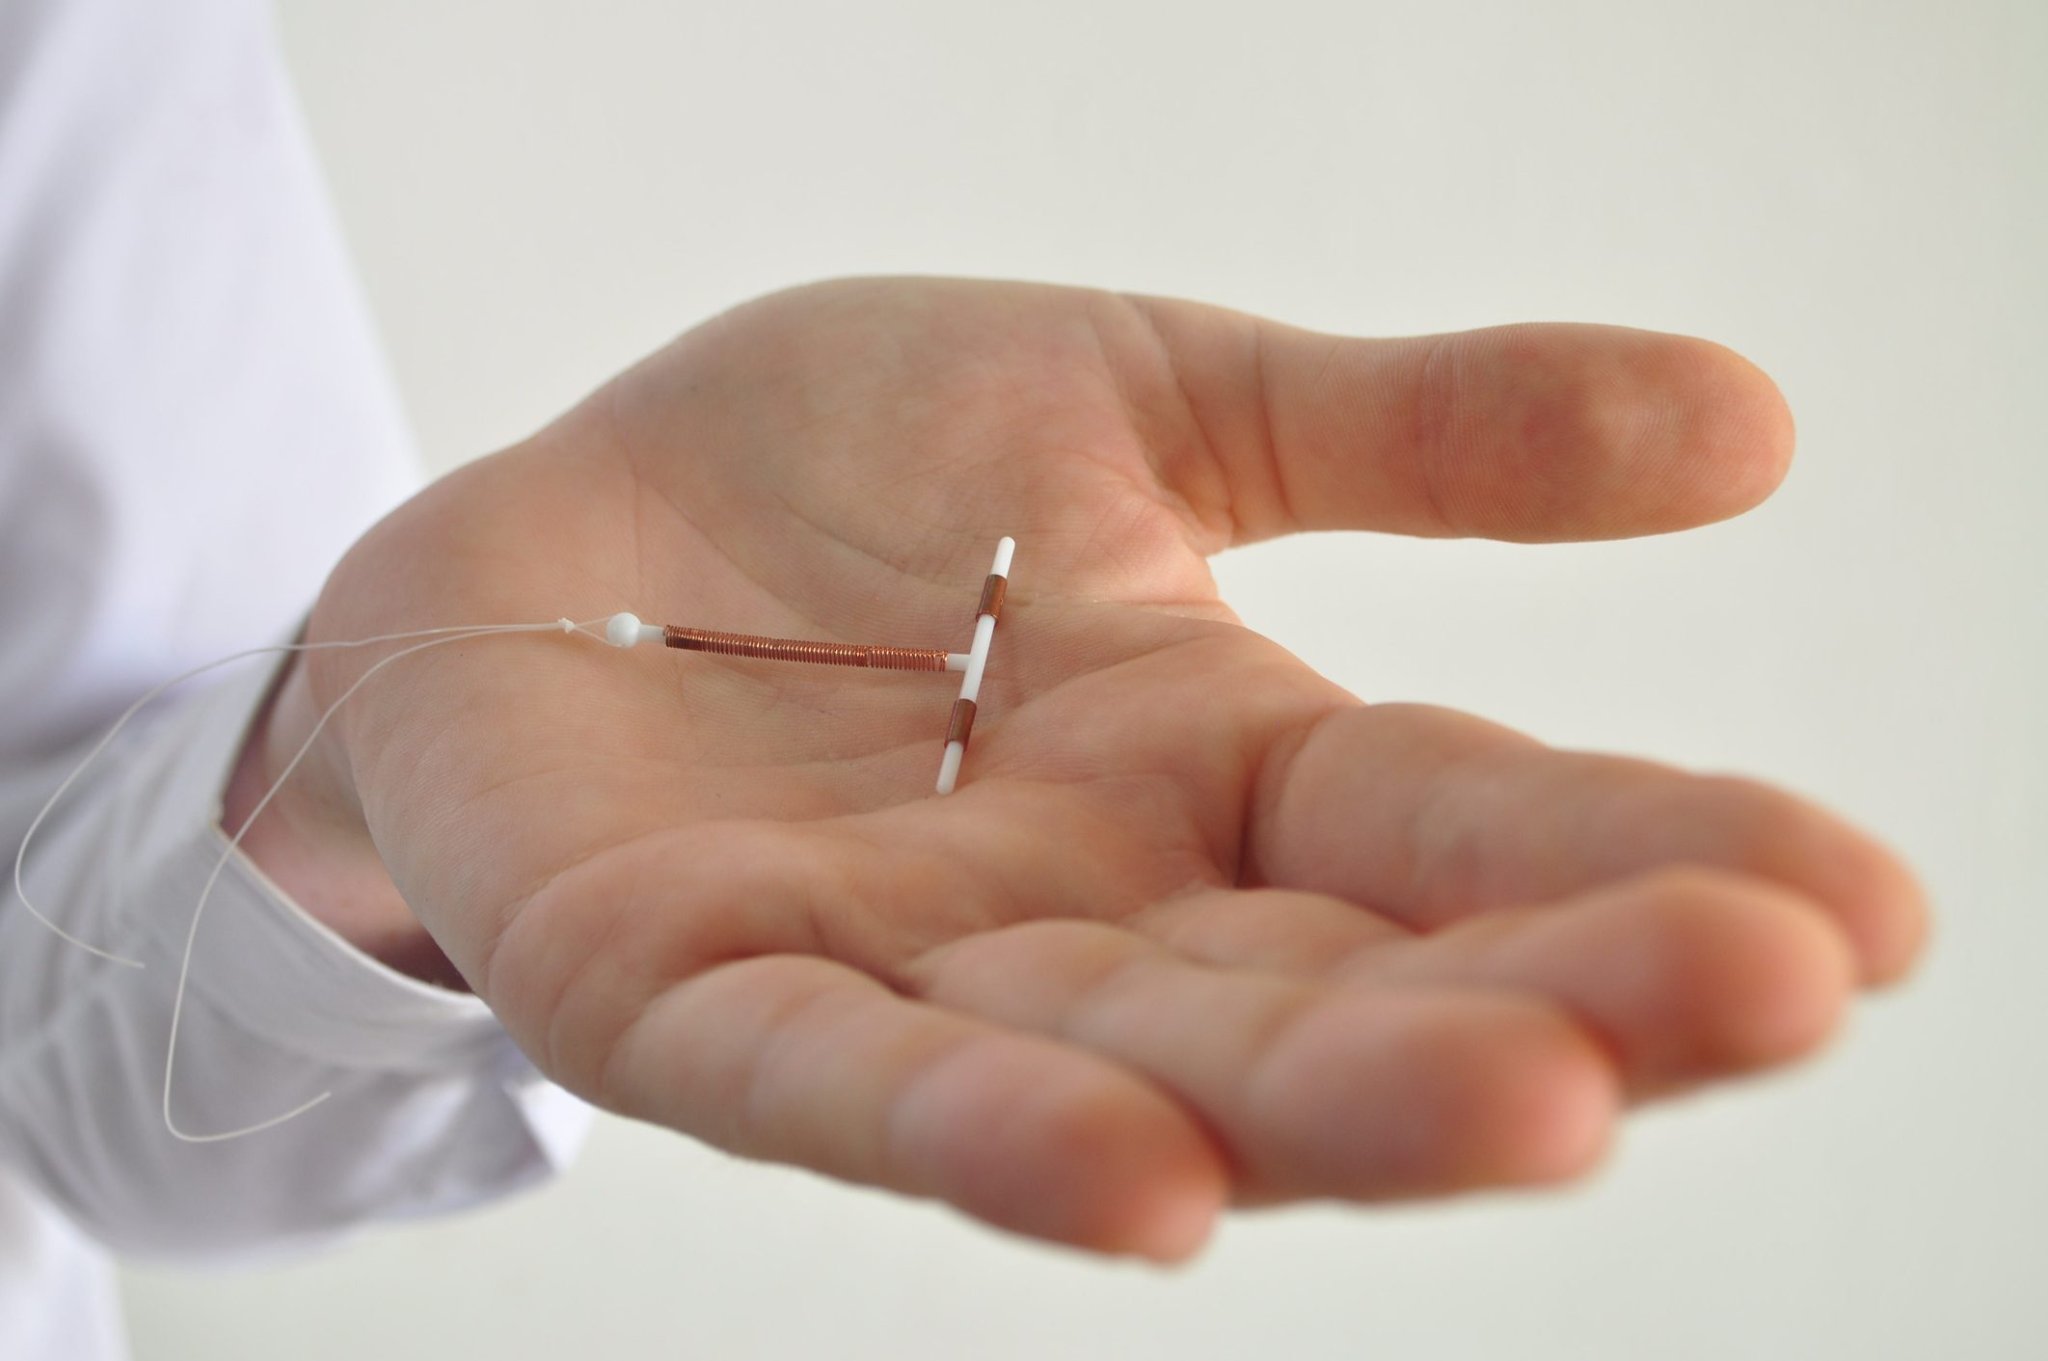 6 Signs You Should Consider Switching From Birth Control Pills to an IUD